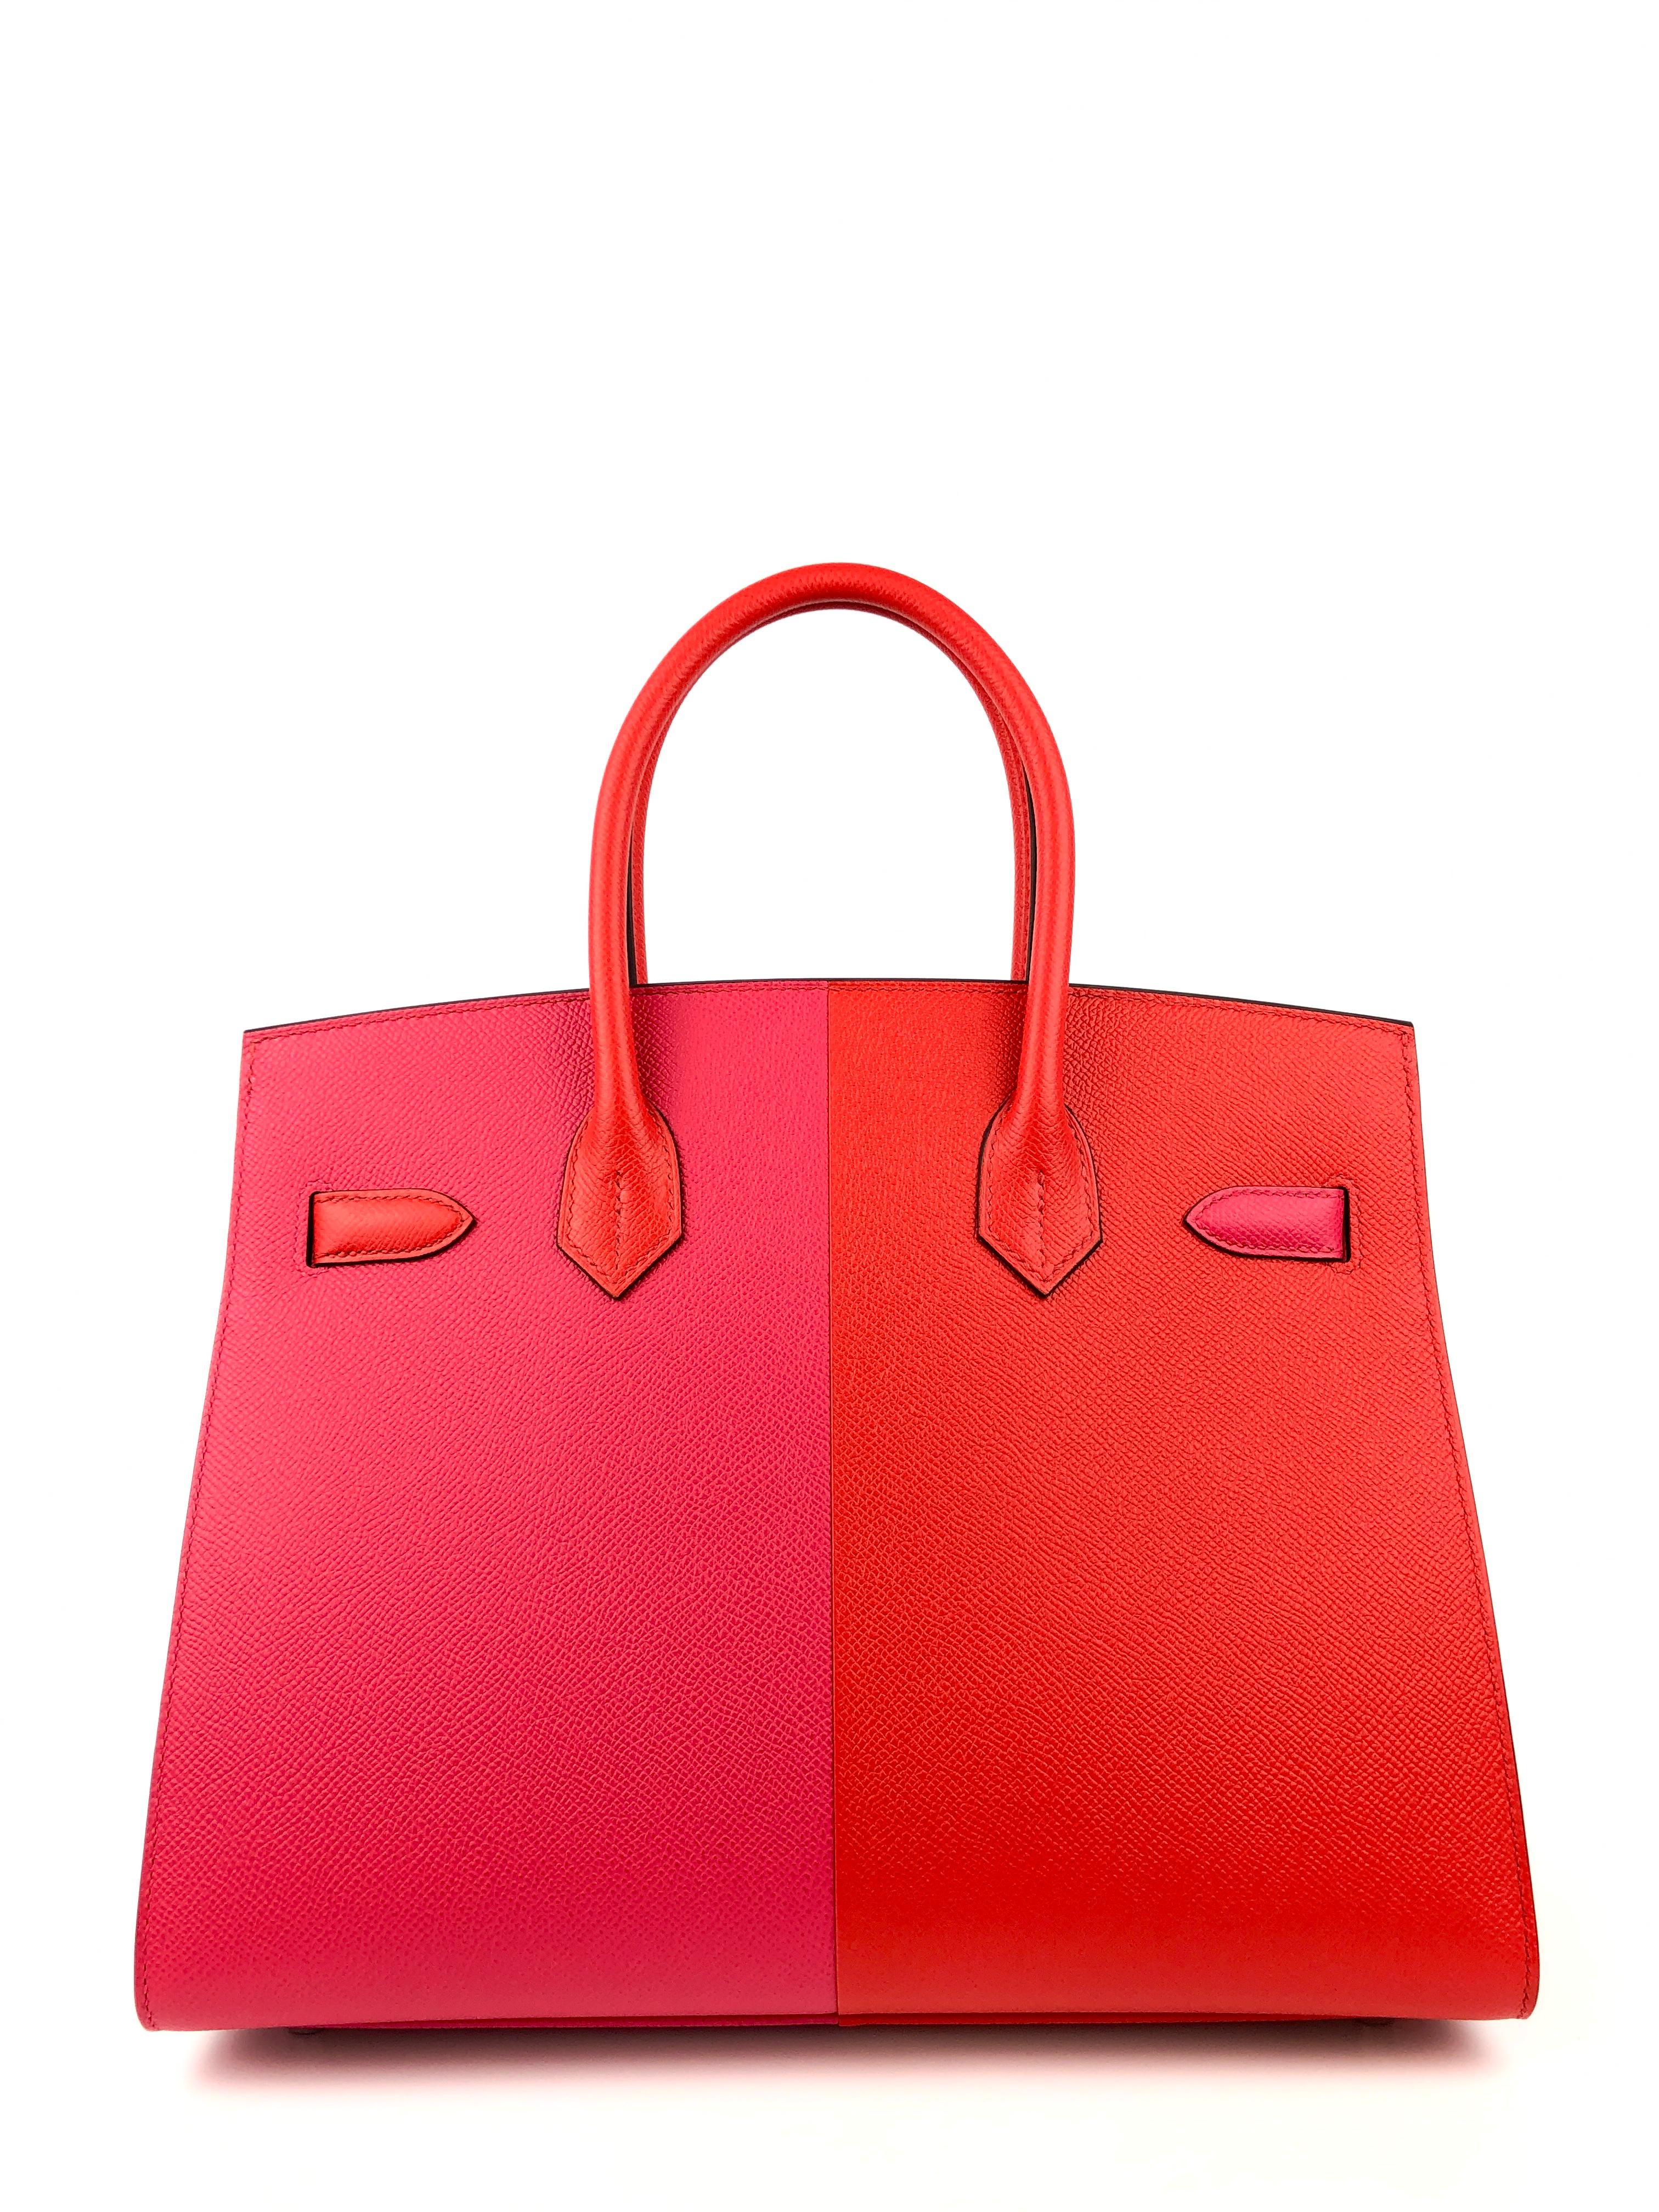 This authentic Hermès Pink and Red Epsom Sellier 30 cm Birkin is in pristine condition with the protective plastic intact on the hardware.  Extremely rare, the more structured Sellier silhouette is created with stitching on the outside of the bag. 